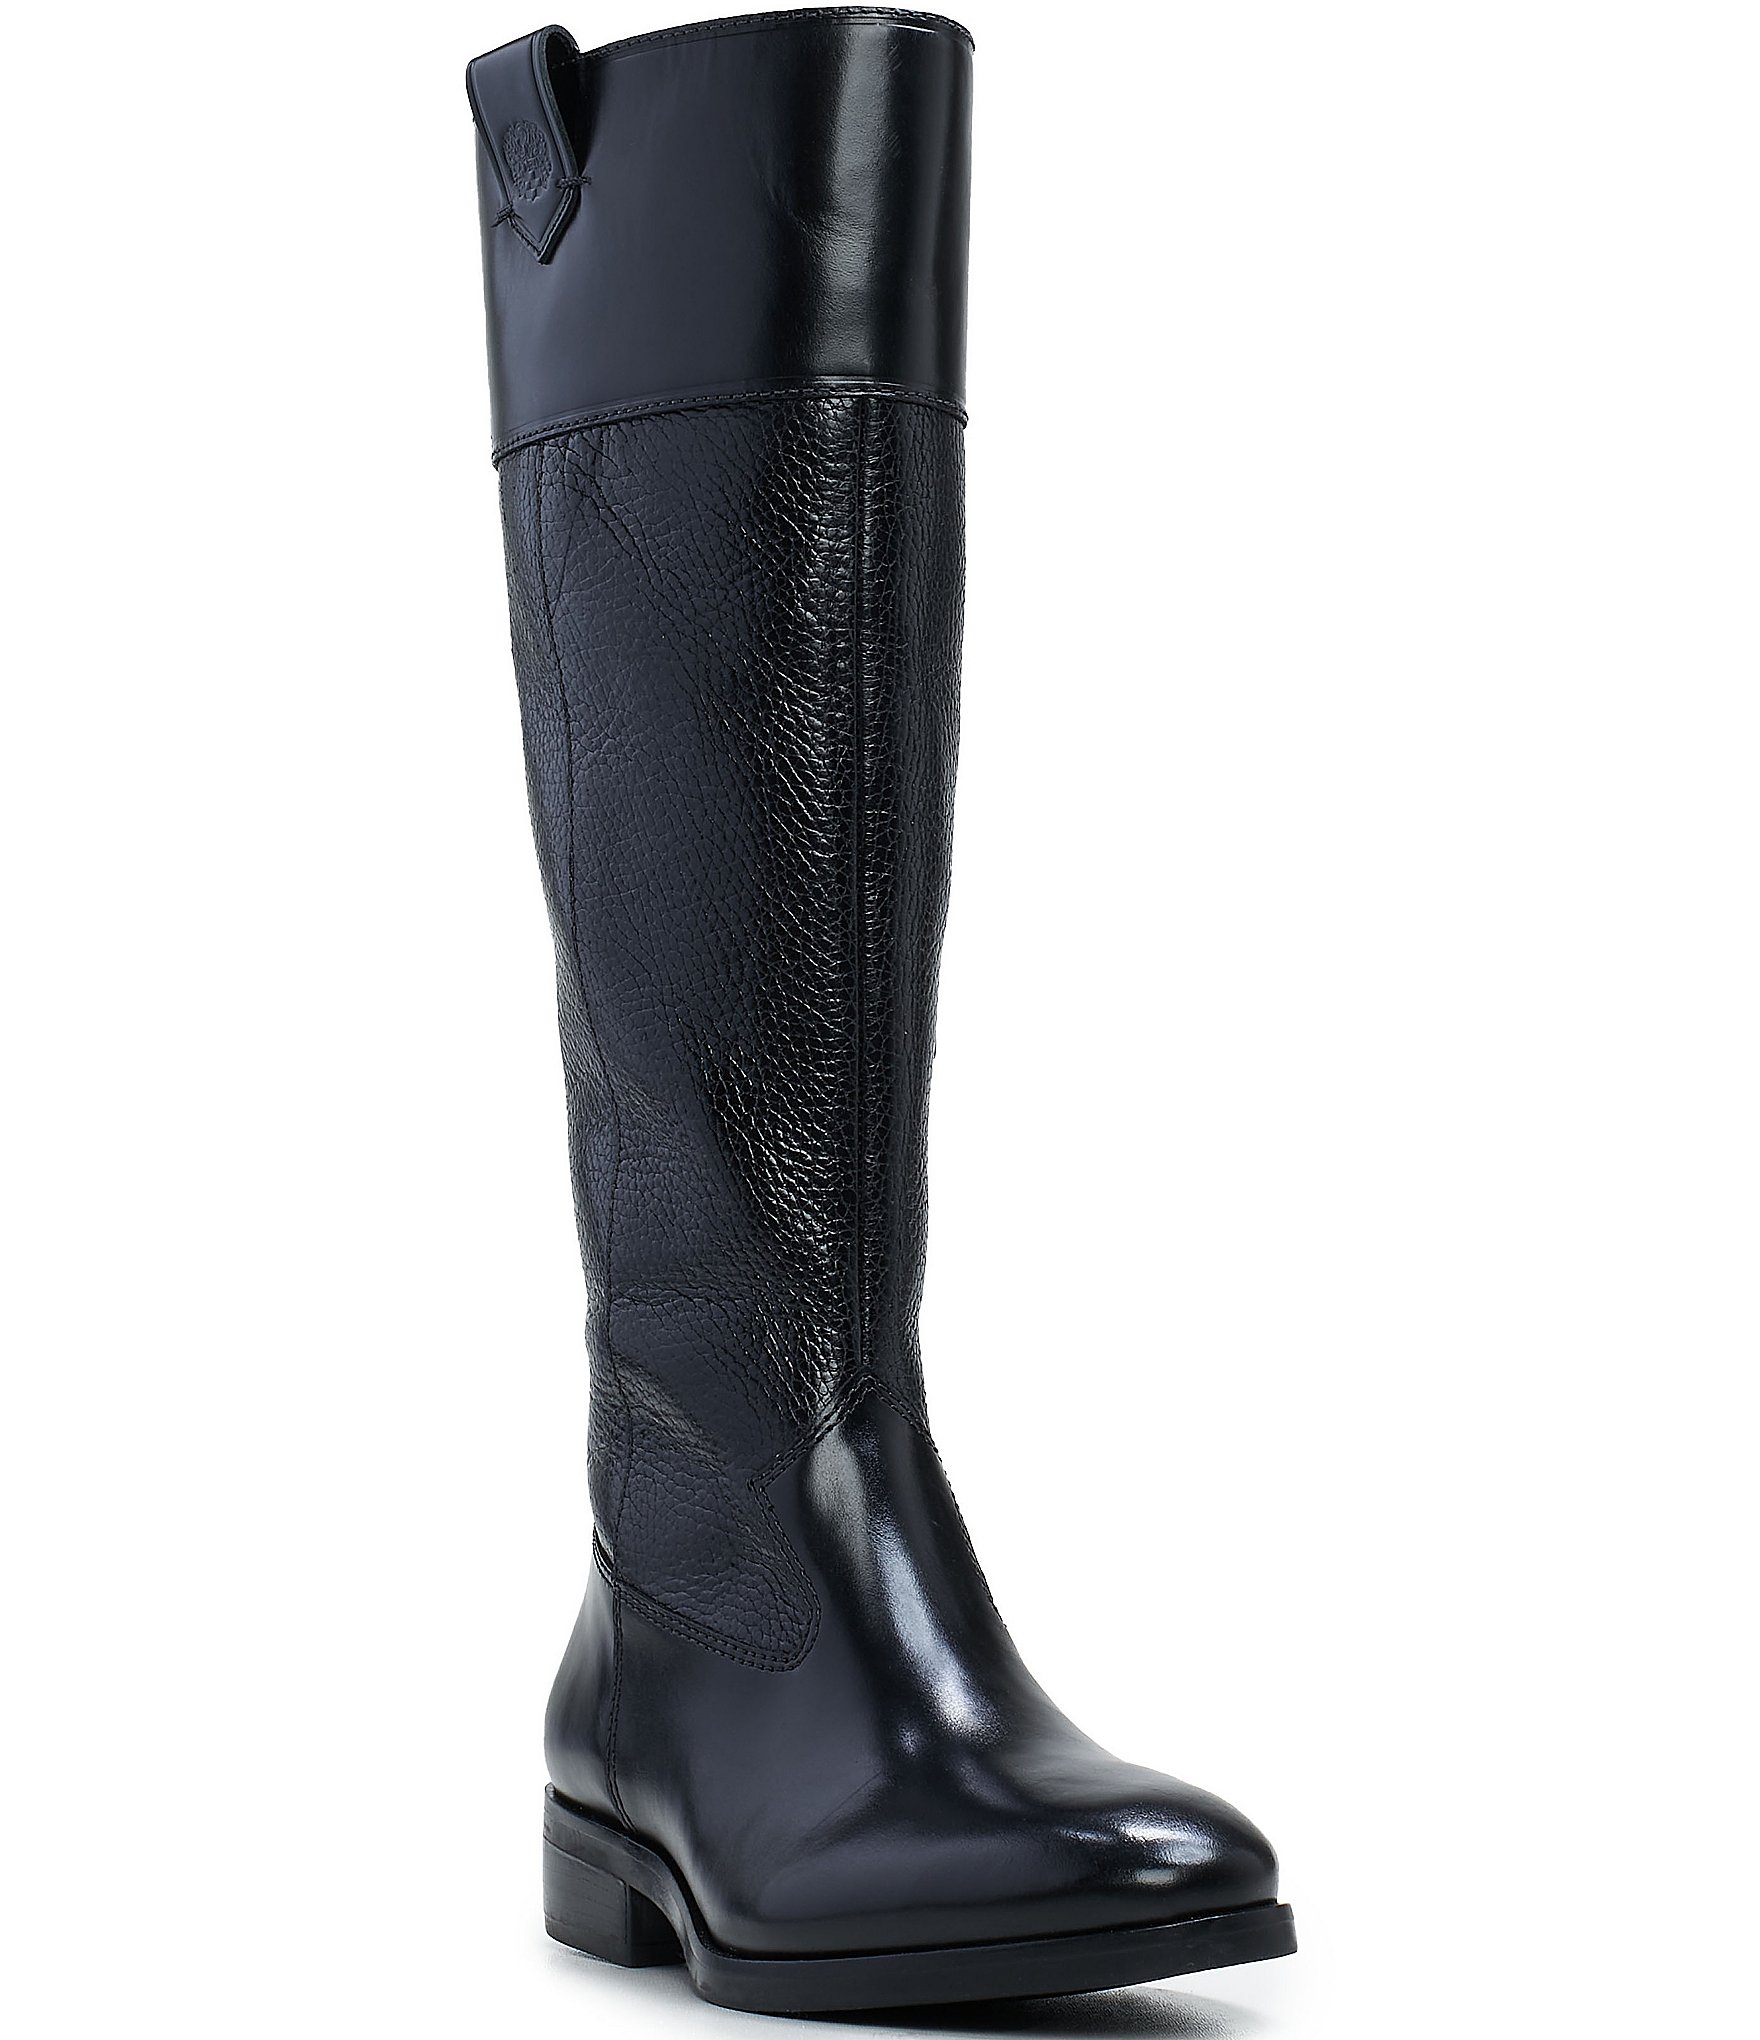 VINCE CAMUTO Women's Farren Smooth Calf Leather Grey Riding Boots